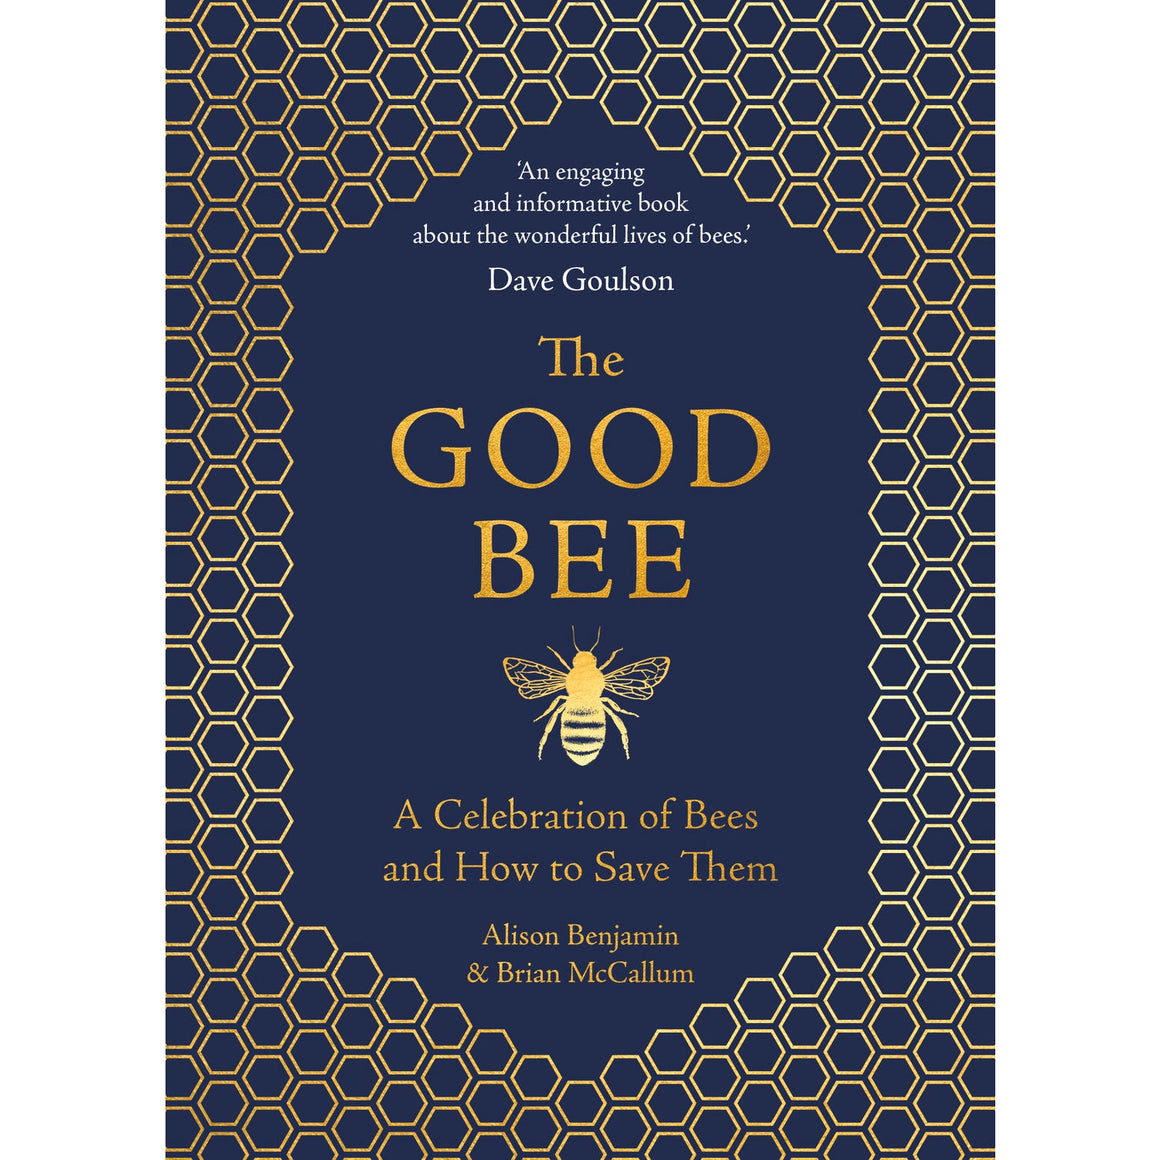 The Good Bee: A Celebration of Bees and How to Save Them